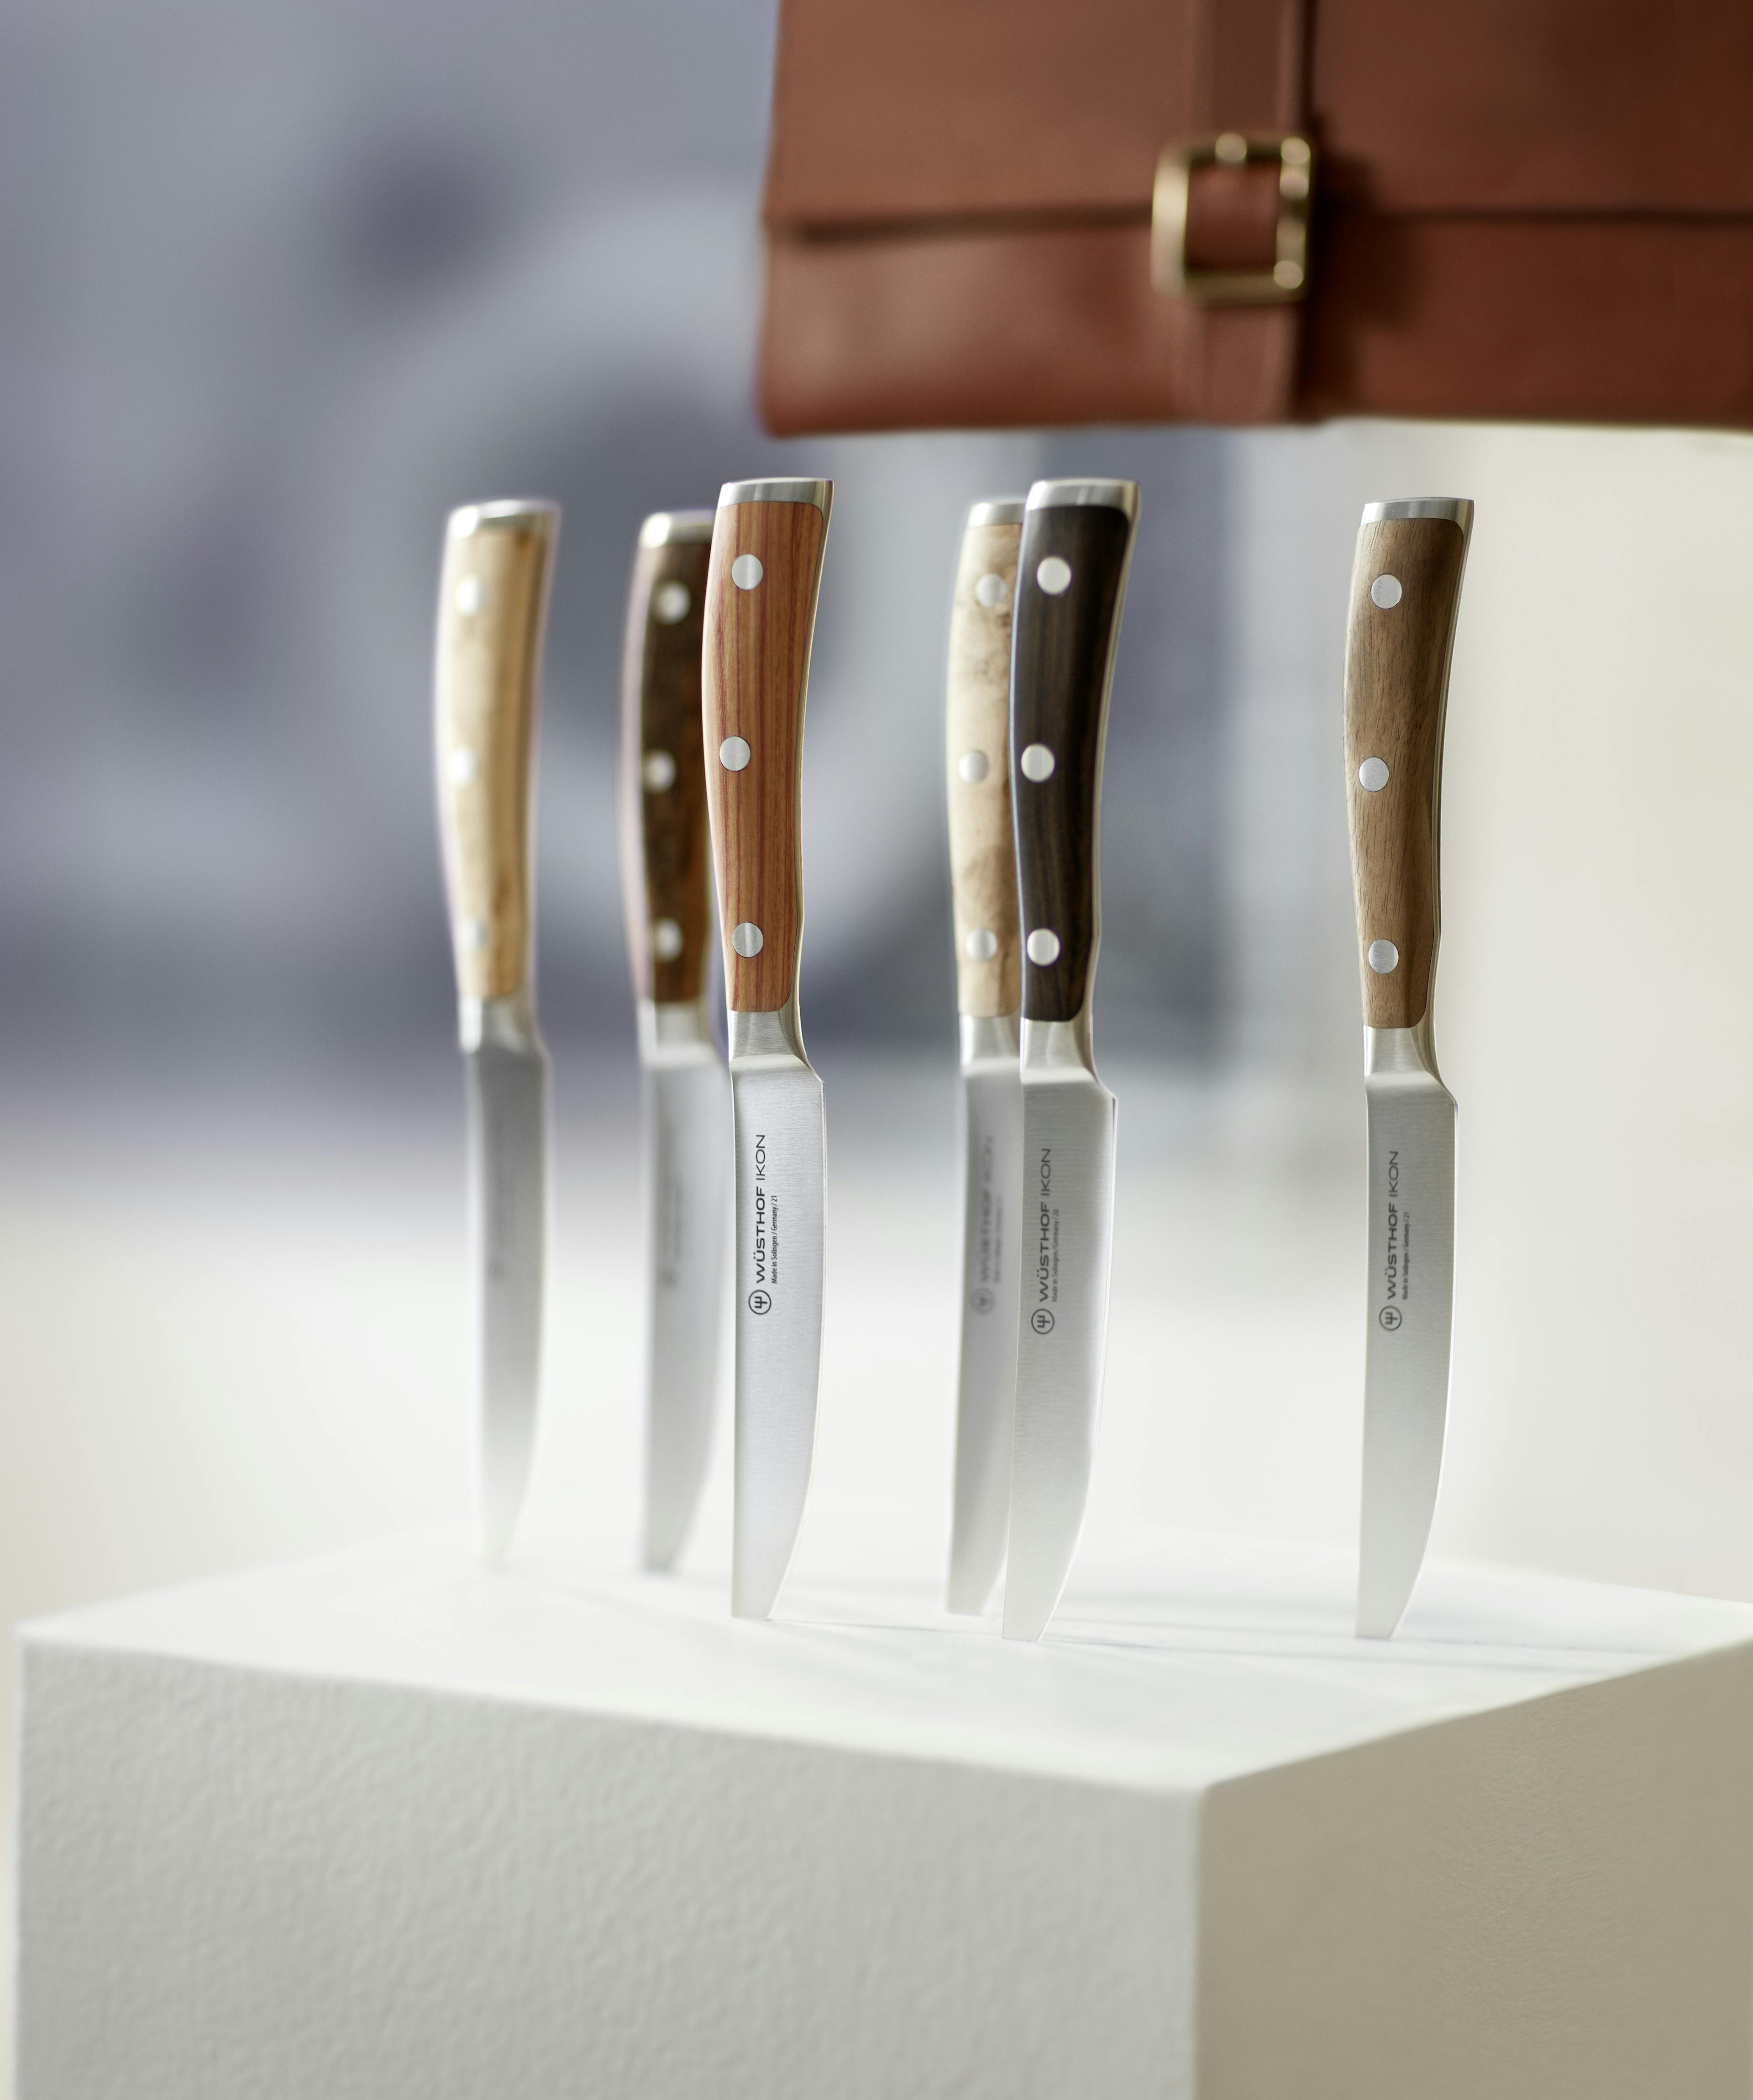 close up of 6 steak knives with different wood handles